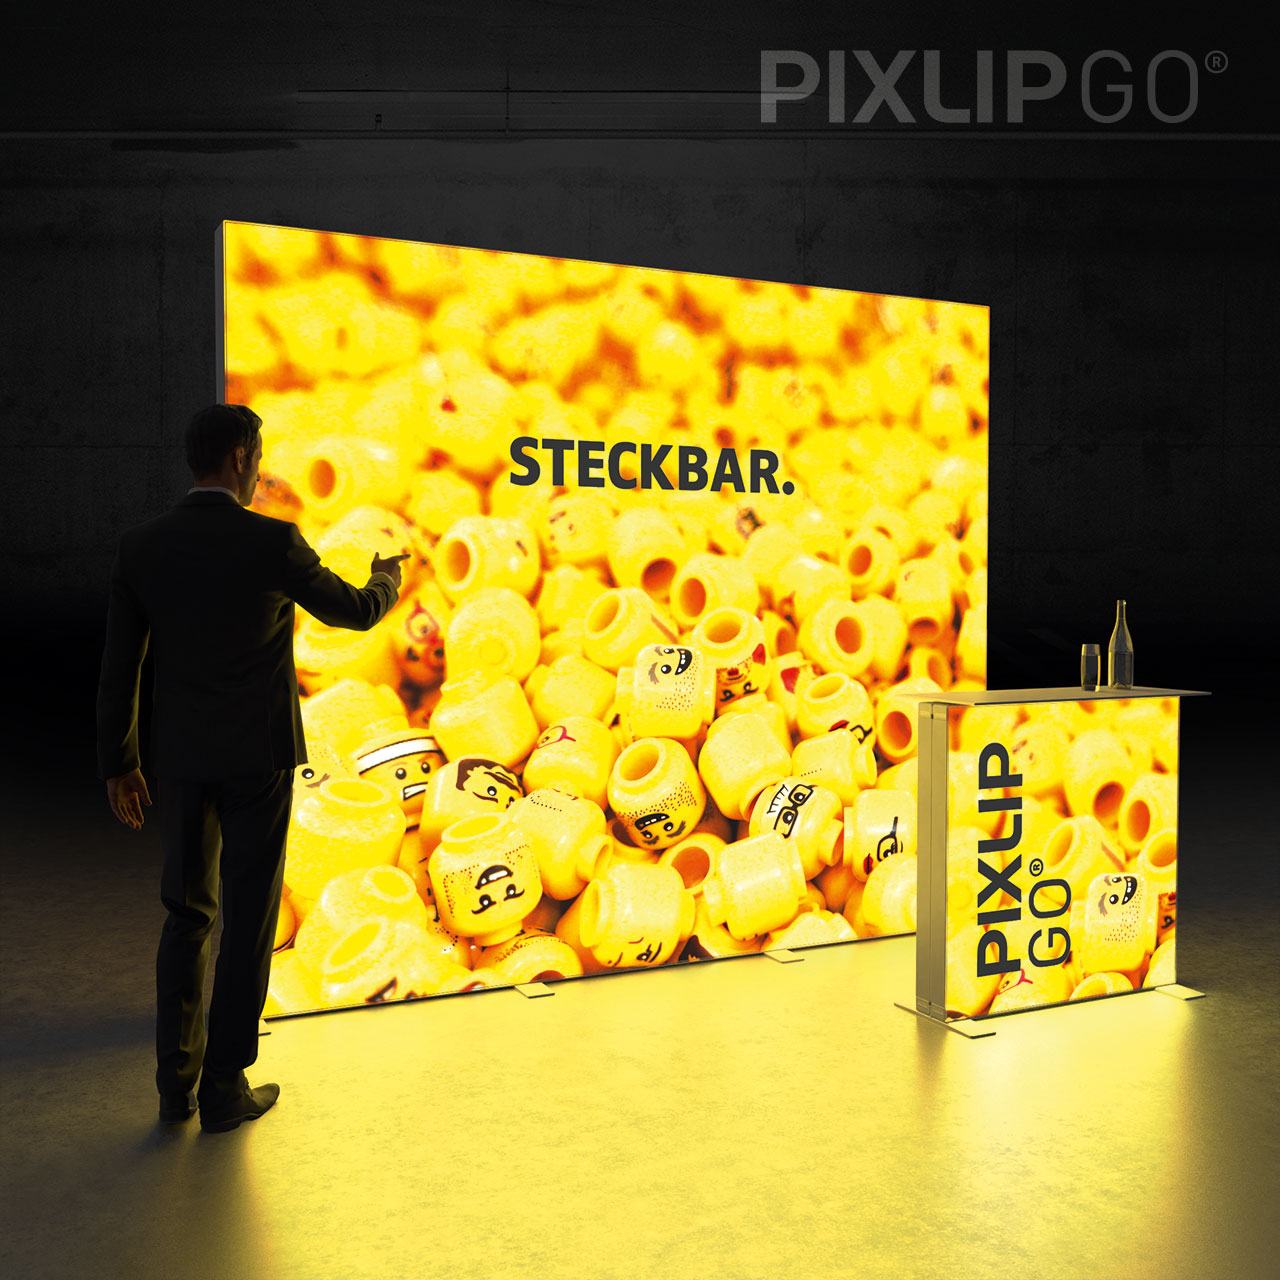 LED Messestand Pixlip GO STAND HS30